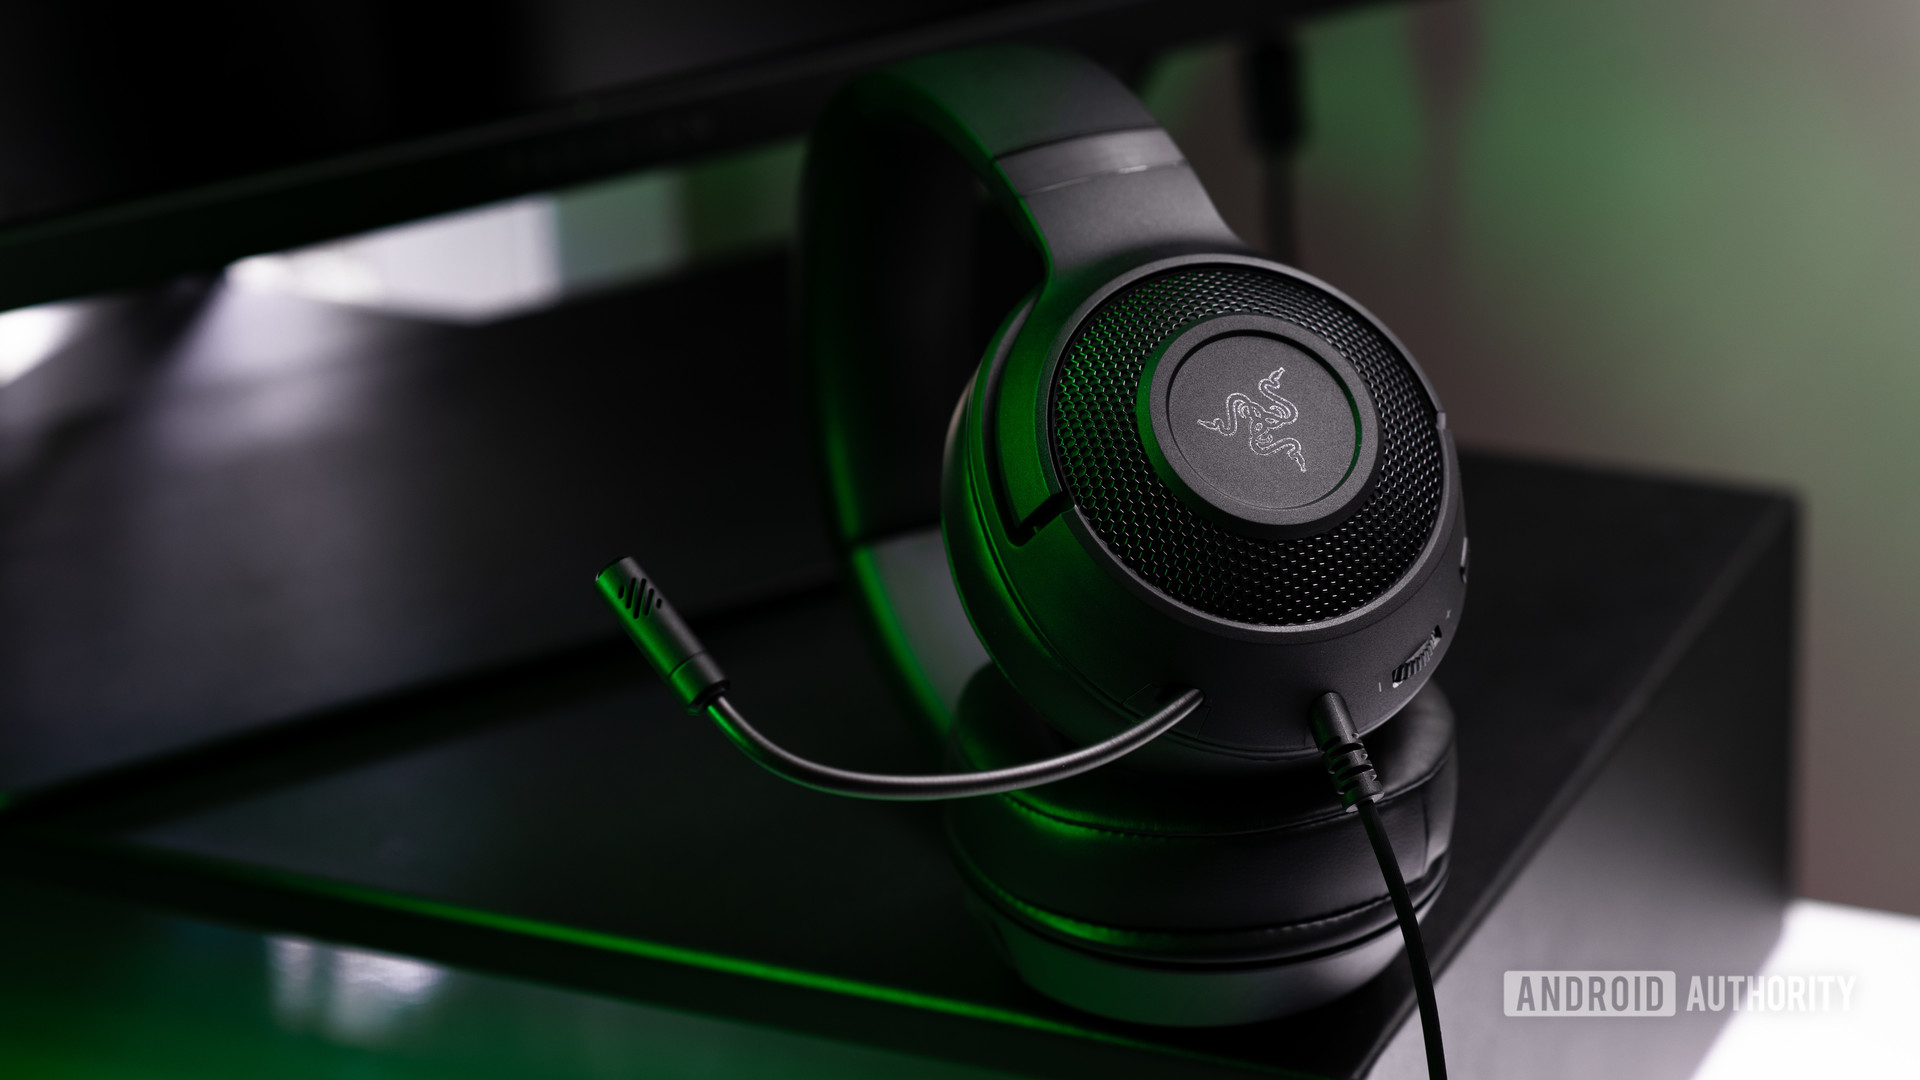 A picture of the Razer Kraken X wired gaming headset against a computer monitor.